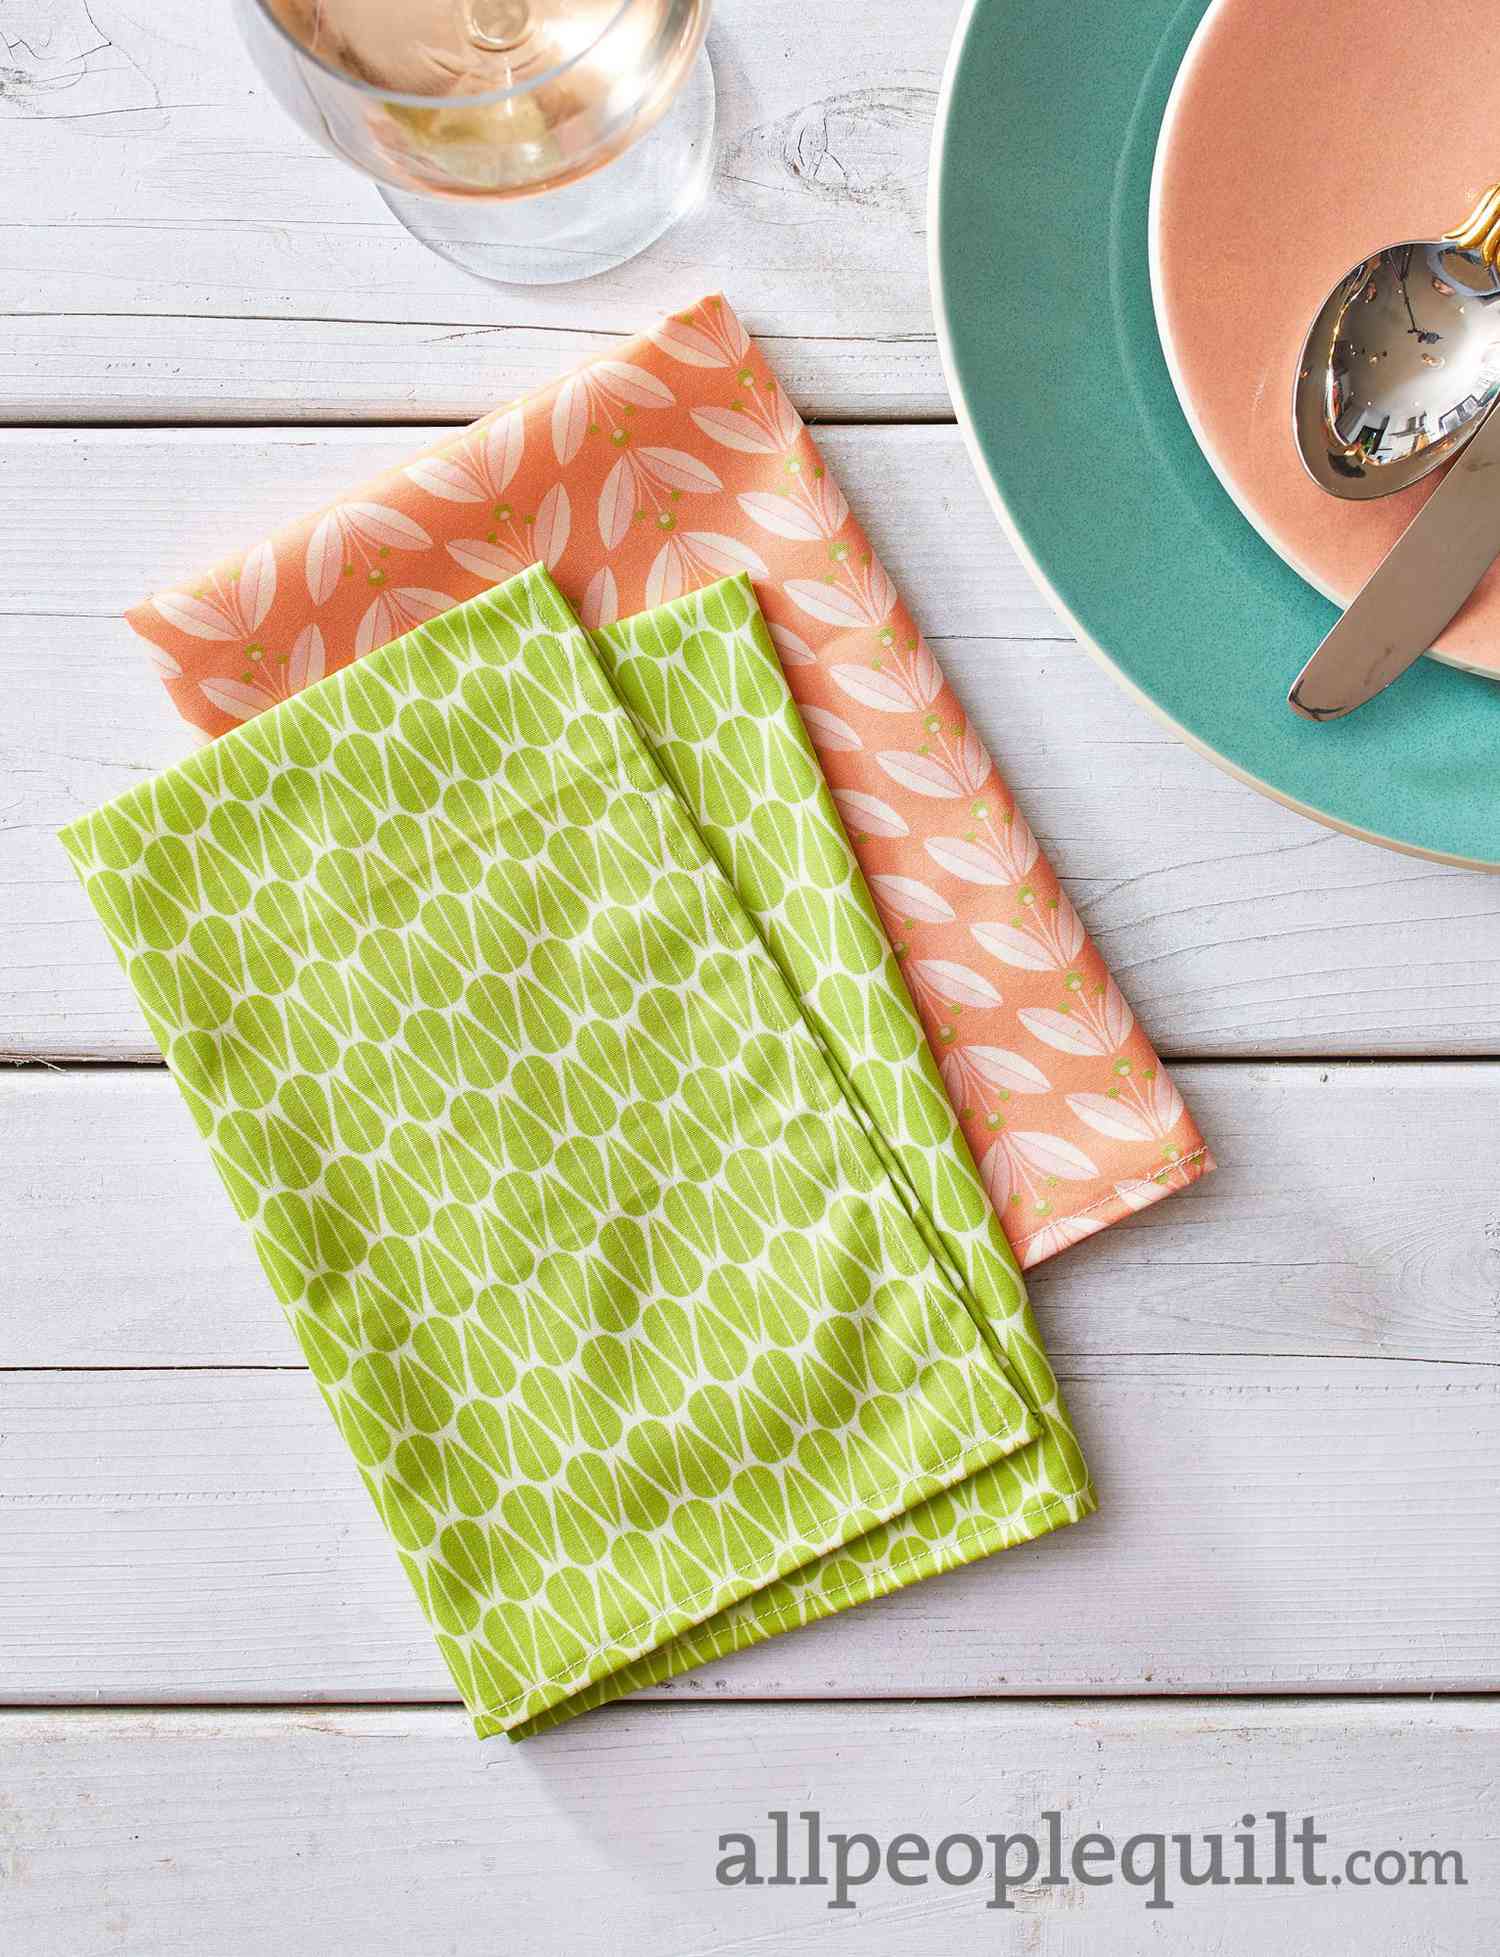 Easy DIY Project: Making Your Own Cloth Napkins